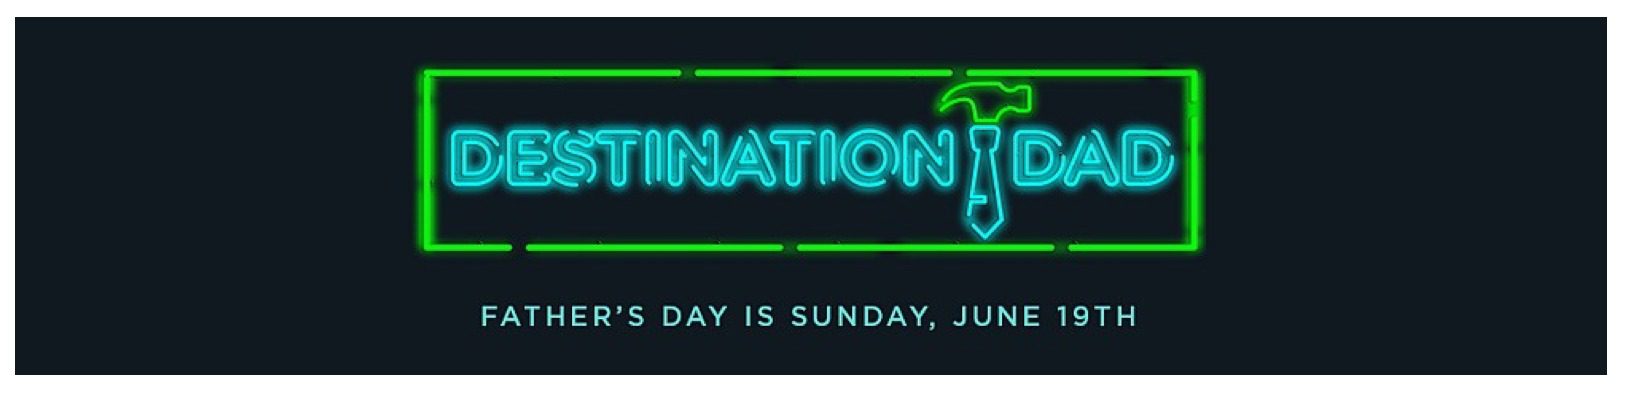 Father's Day Gift Giving Made Easy Sears Destination Dad 3